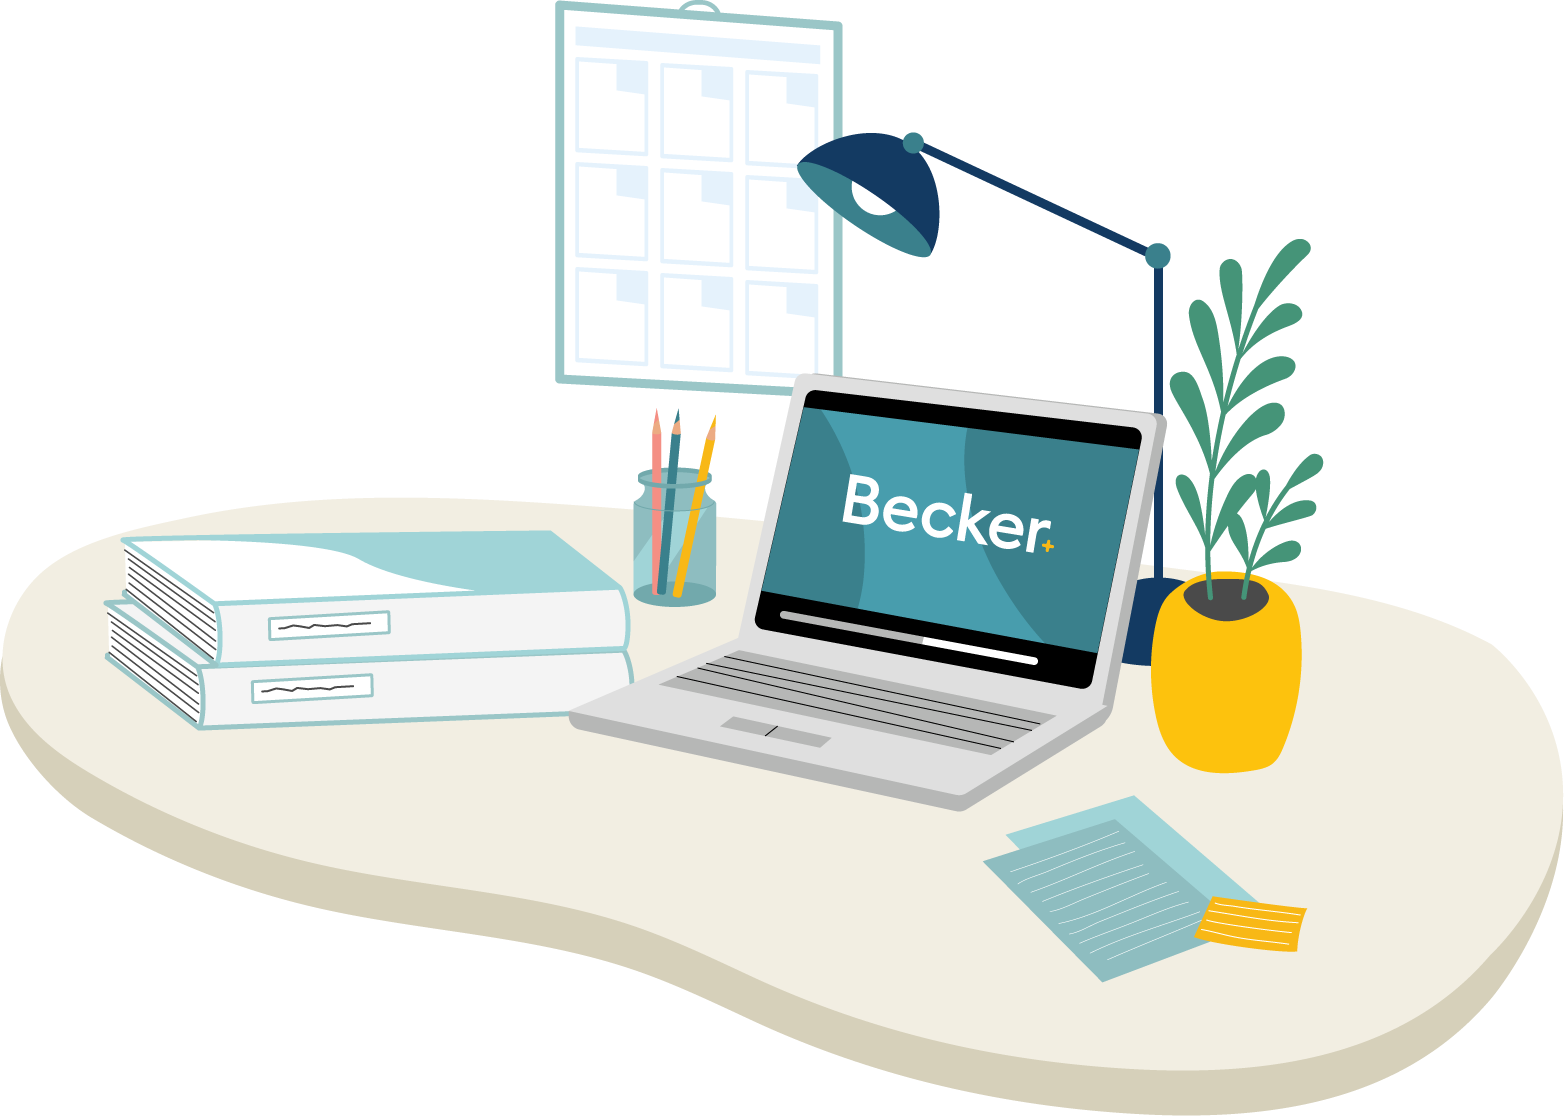 A stack of Becker material on a desk